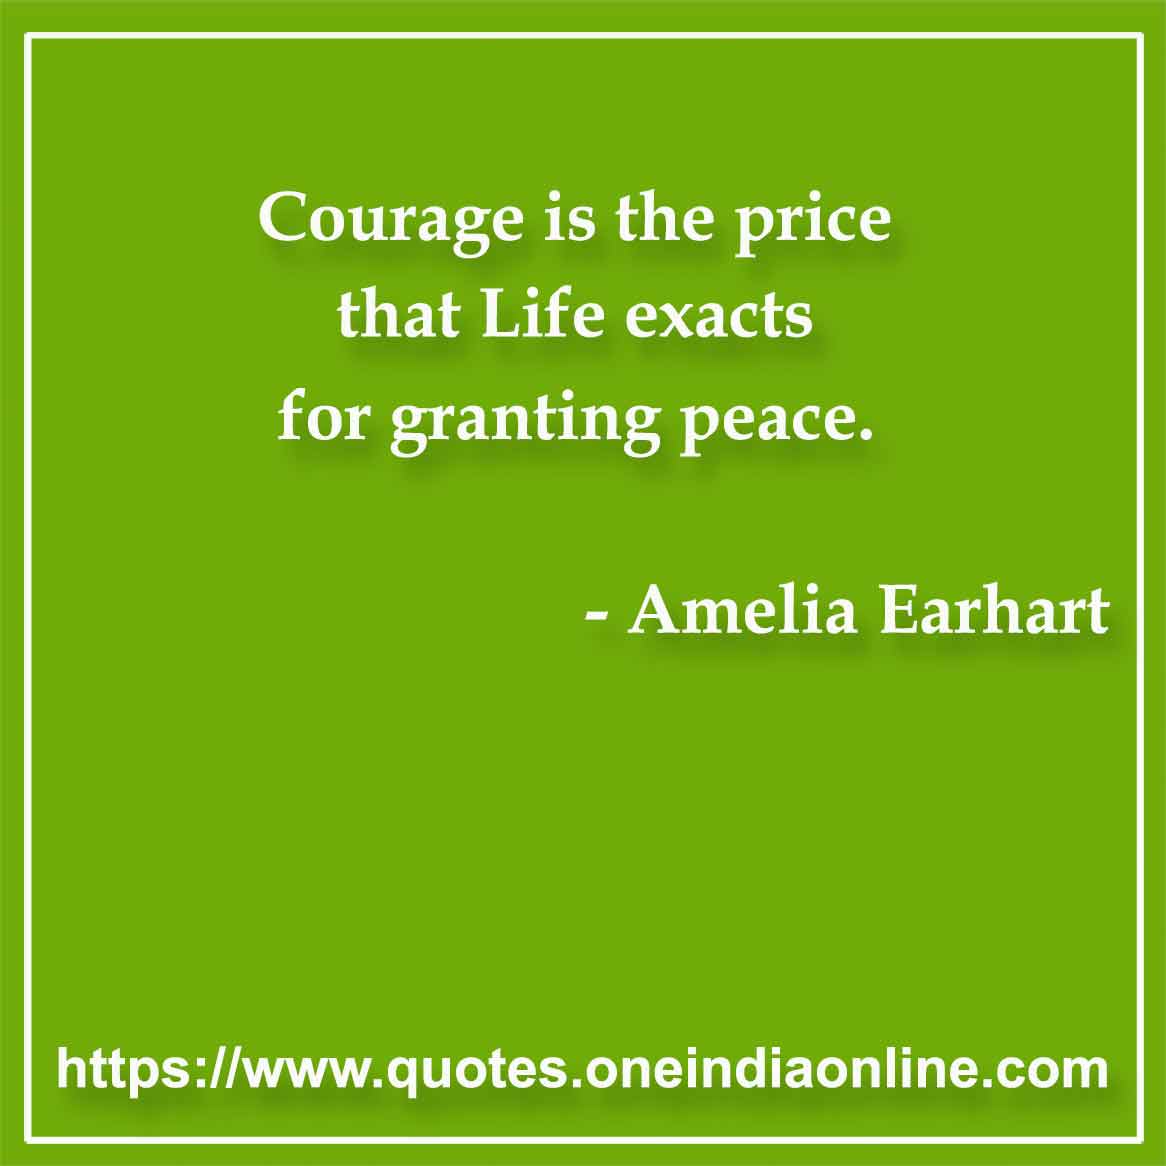 Courage is the price that Life exacts for granting peace.

- Courage Quotes by Amelia Earhart